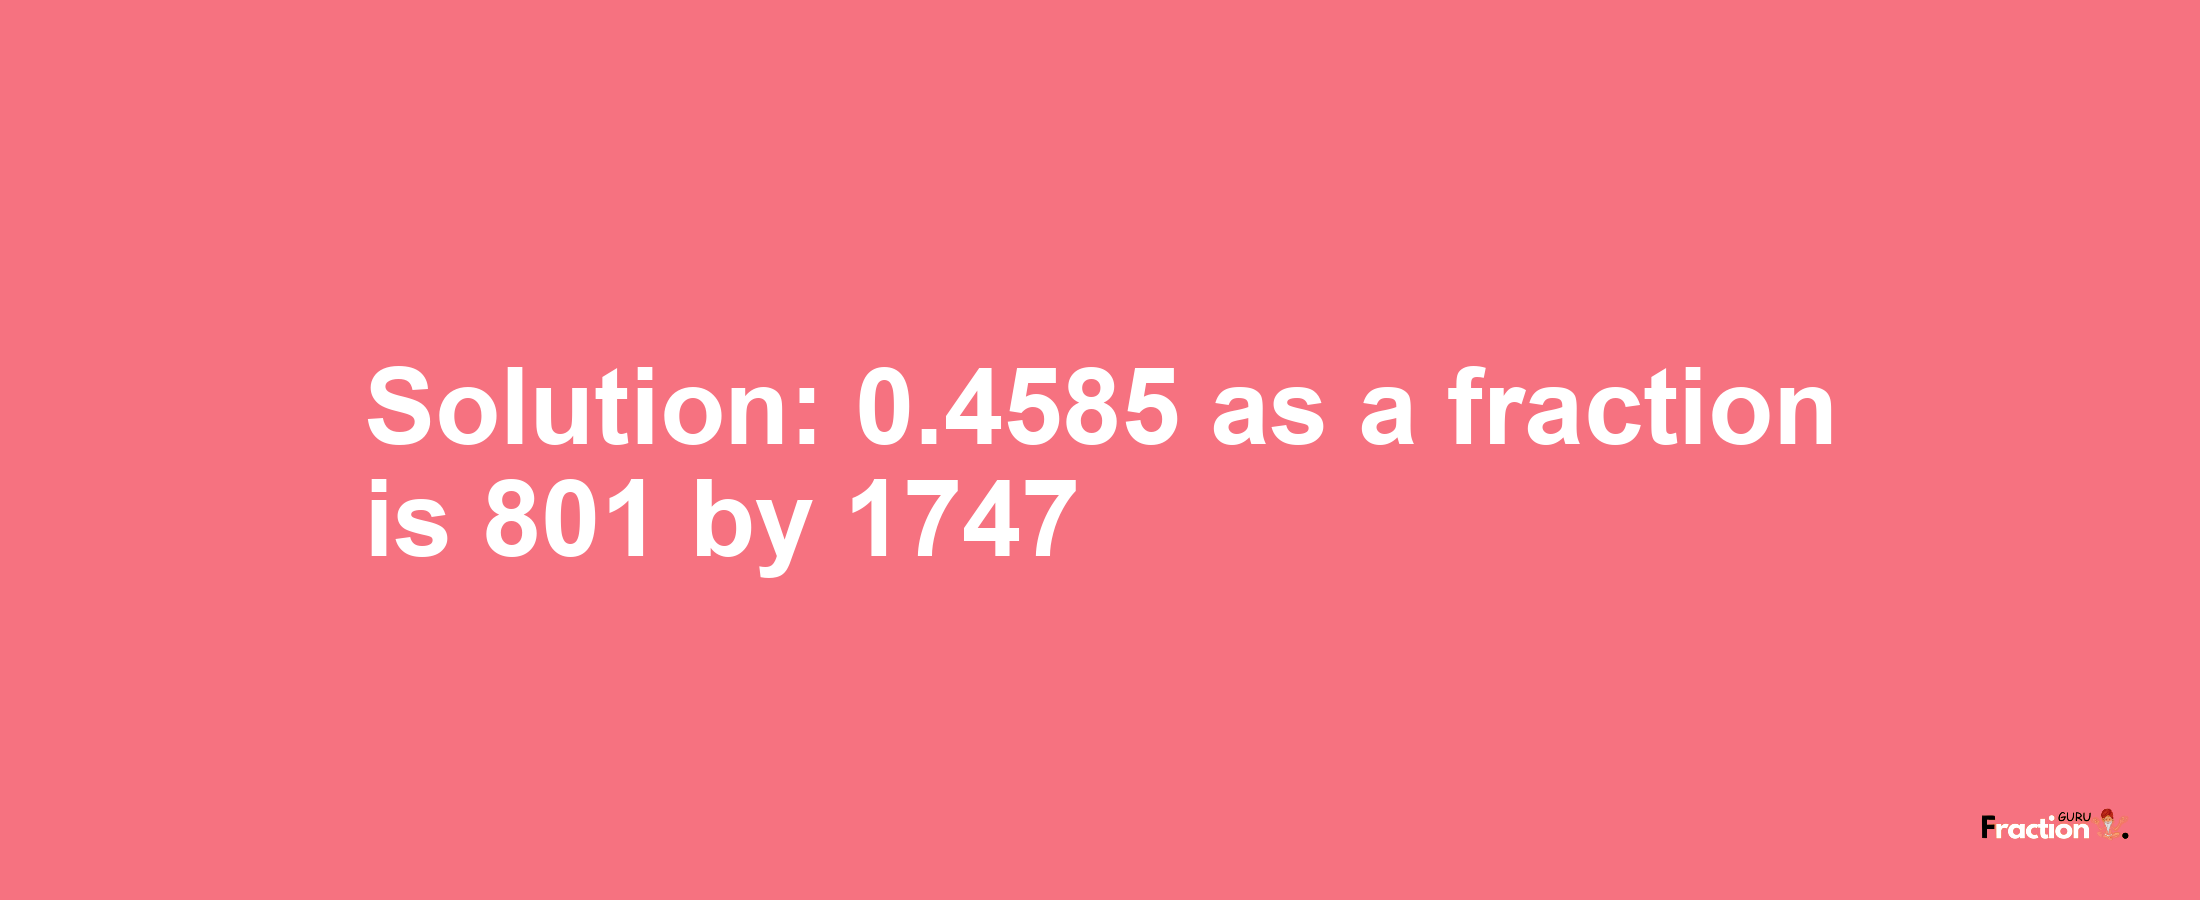 Solution:0.4585 as a fraction is 801/1747